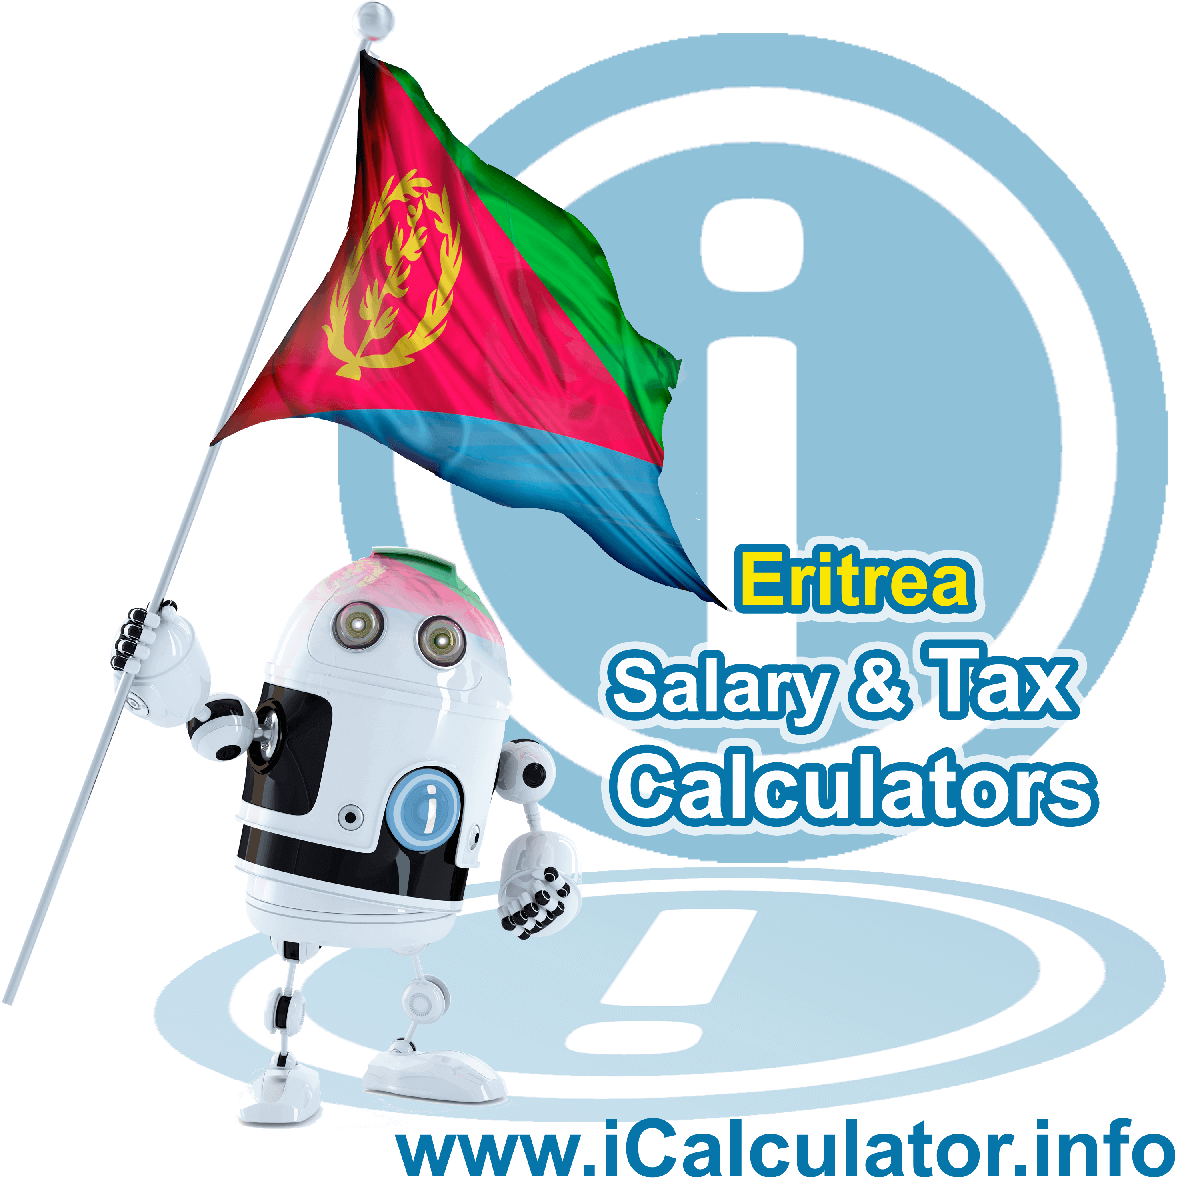 Eritrea Tax Calculator. This image shows the Eritrea flag and information relating to the tax formula for the Eritrea Salary Calculator